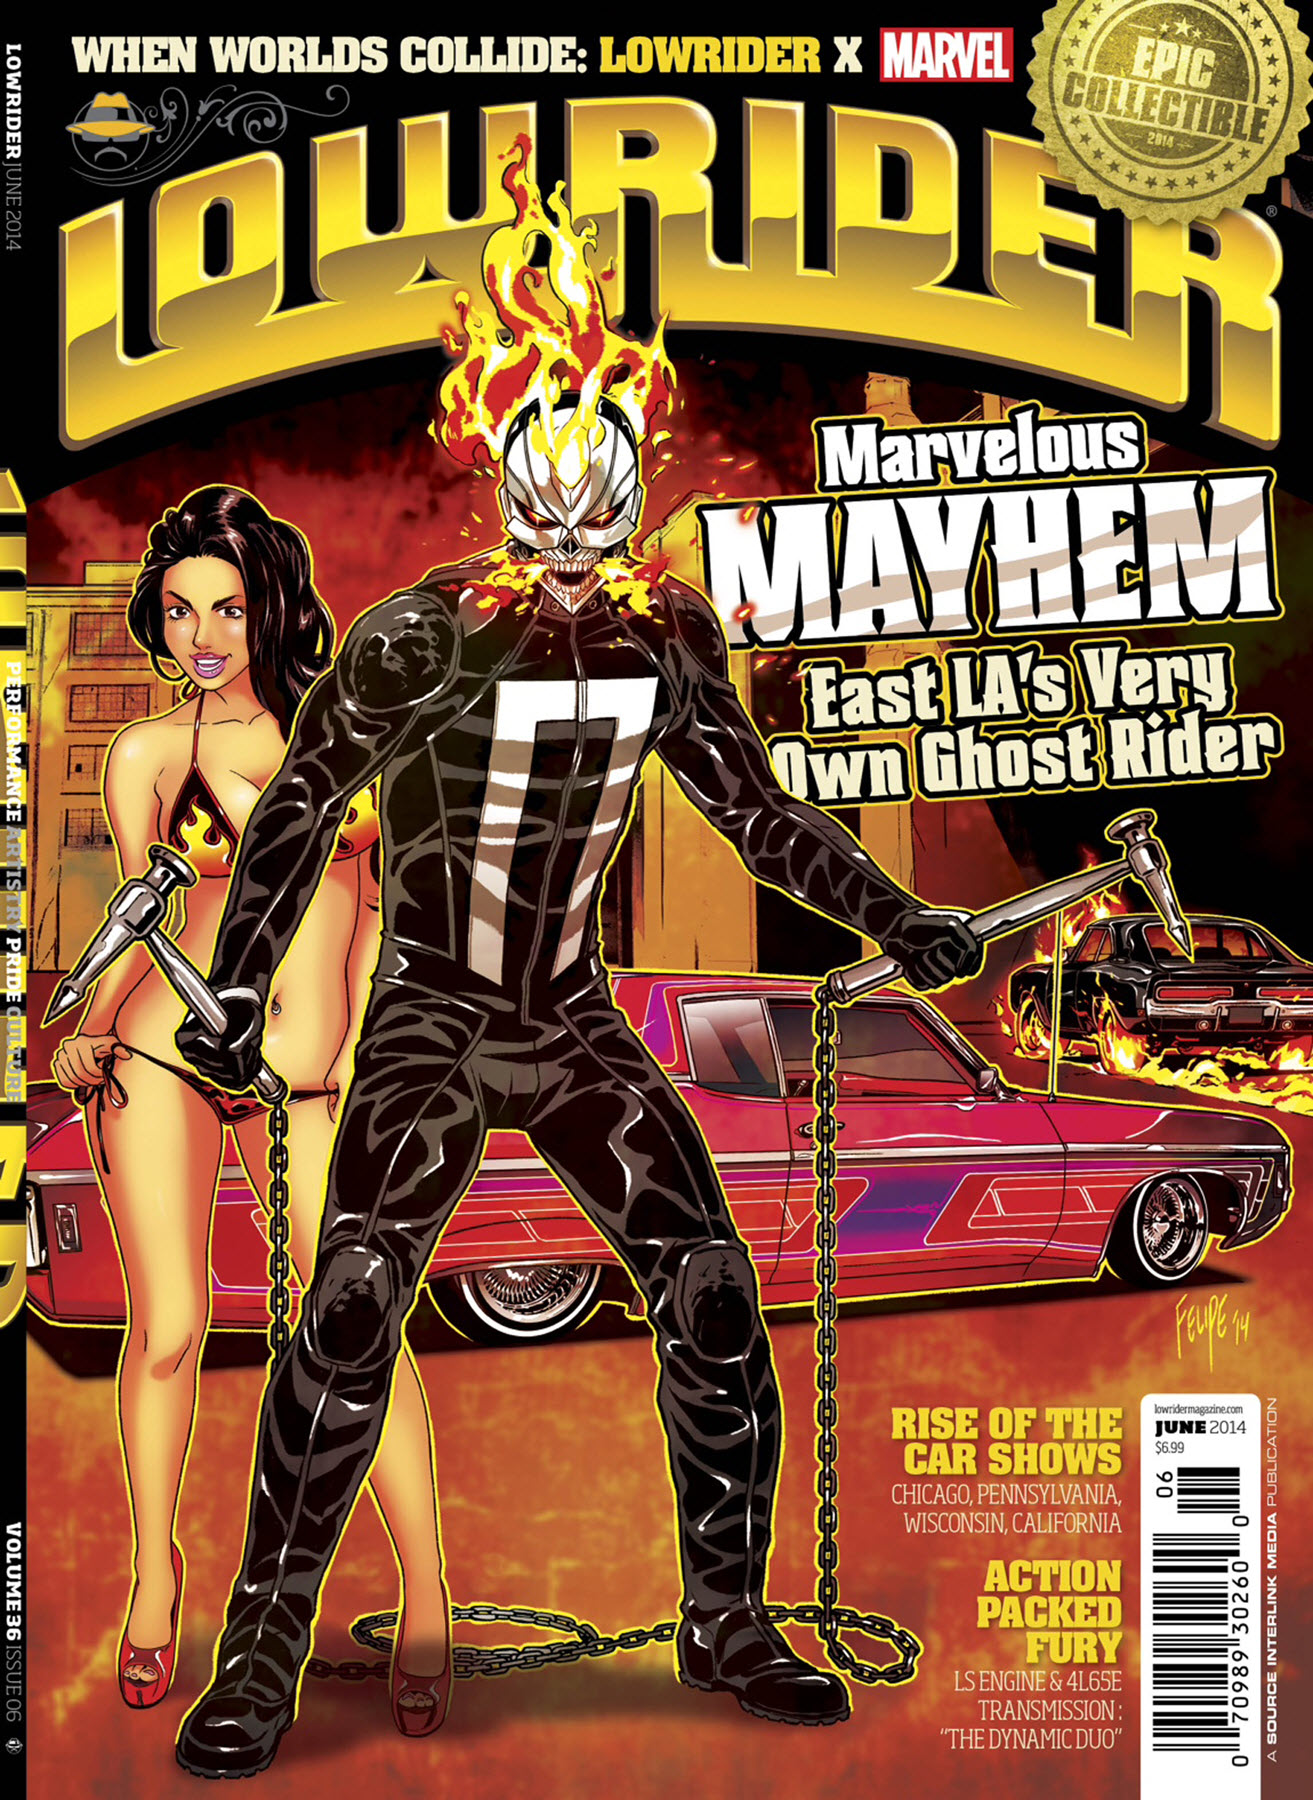 Marvel Comic character Low Rider